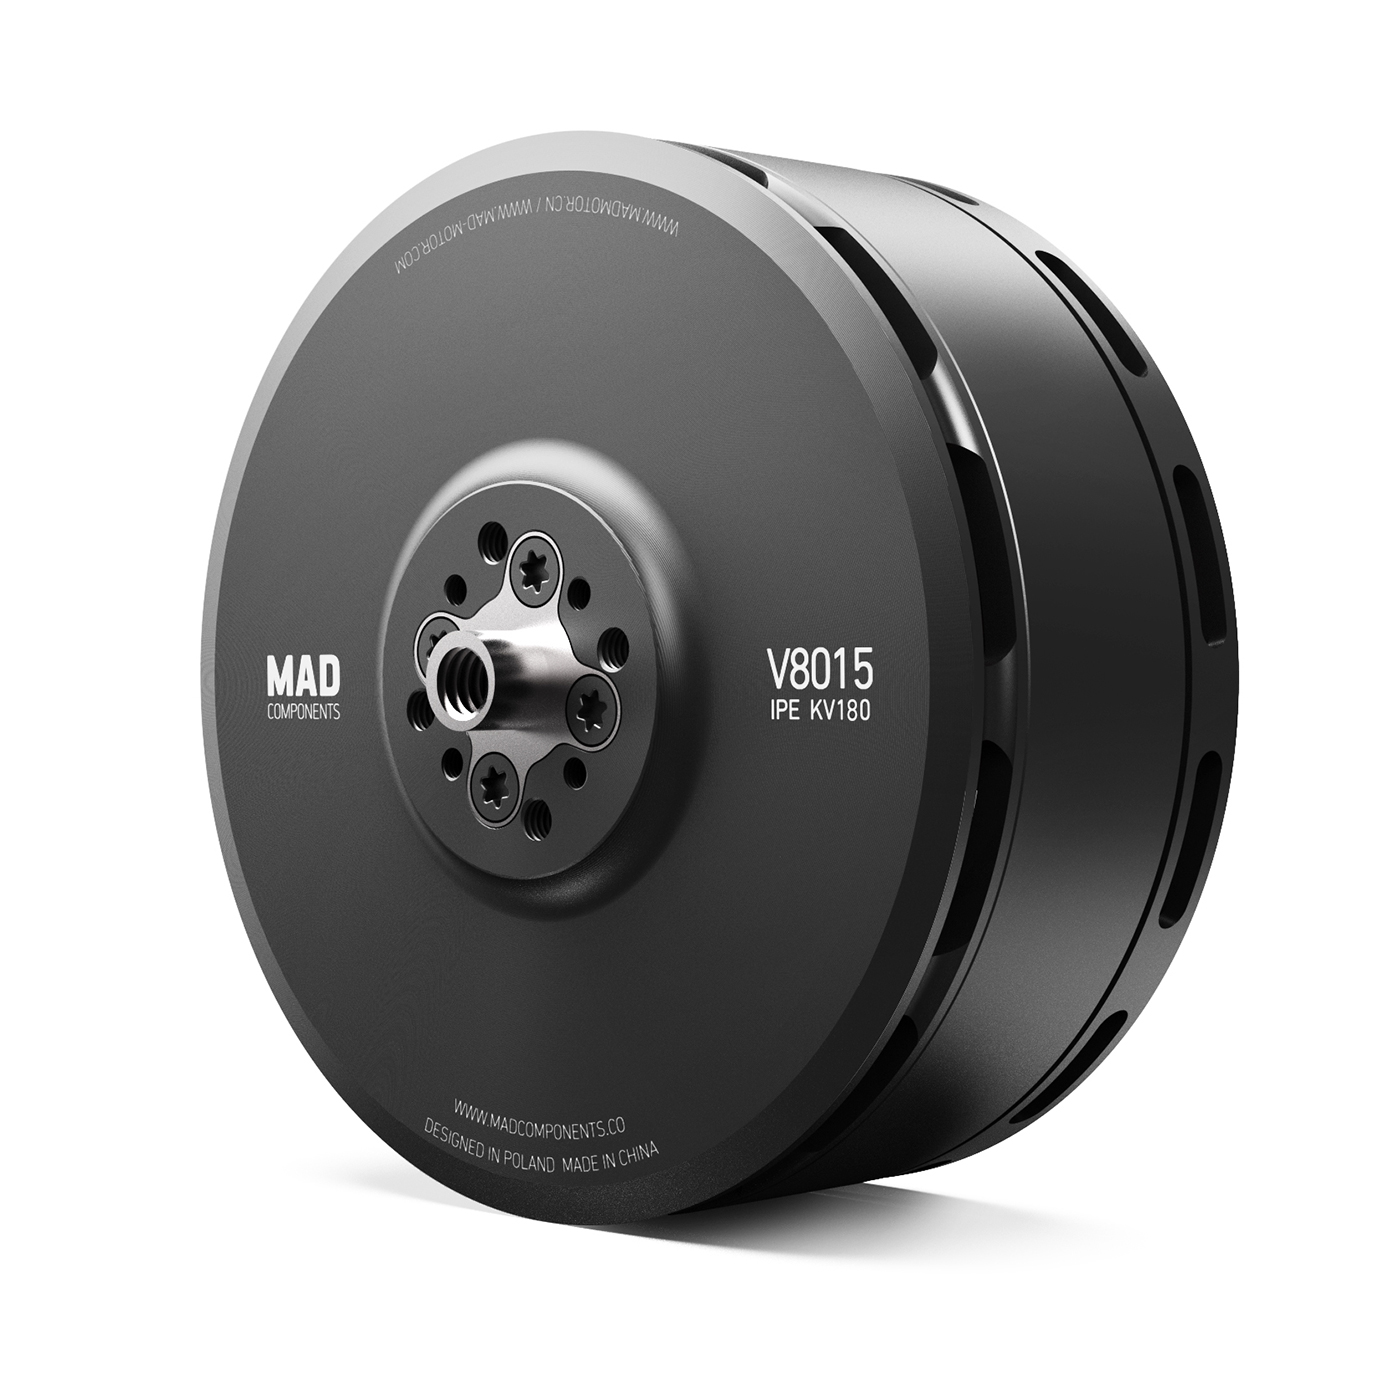 MAD V8015 IPE brushless motor for the classical  and big aerial photography, exploration, Archaeology, Remote sensing surveying, Mapping VTOL UAV drone aircraft